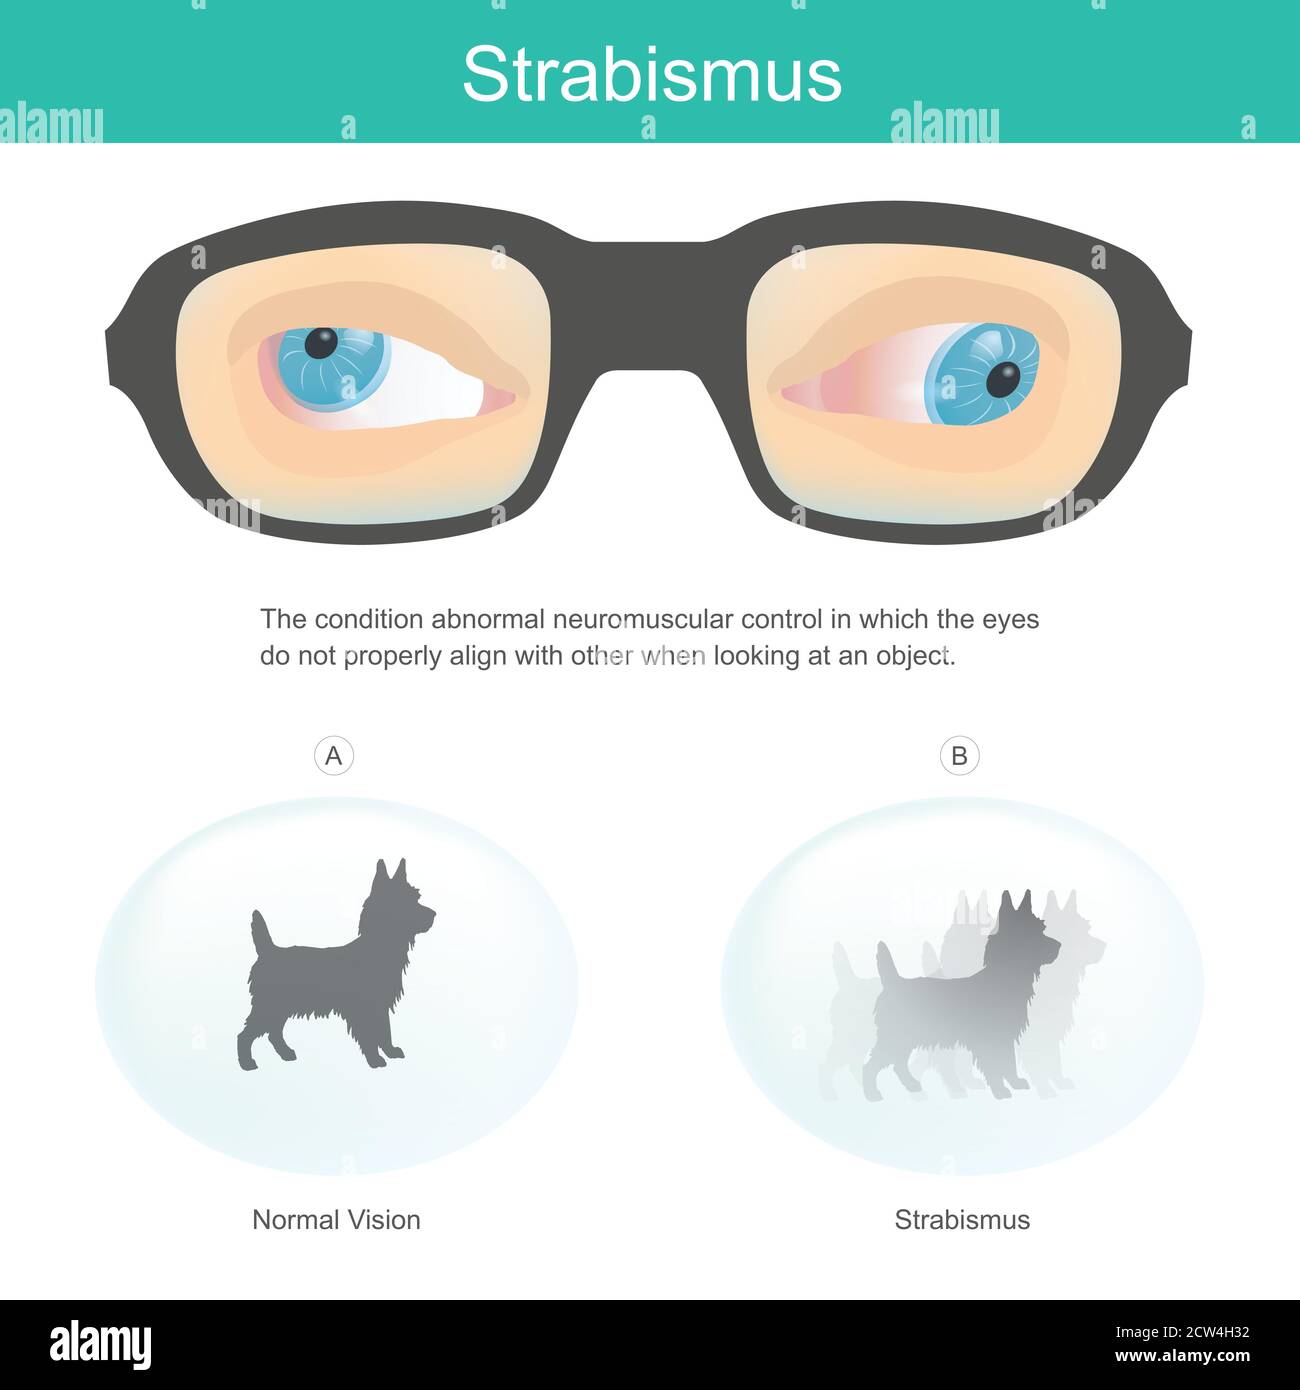 Strabismus. Meaning the condition abnormal neuromuscular control in which the eyes do not properly align with other when looking at an object. Stock Vector